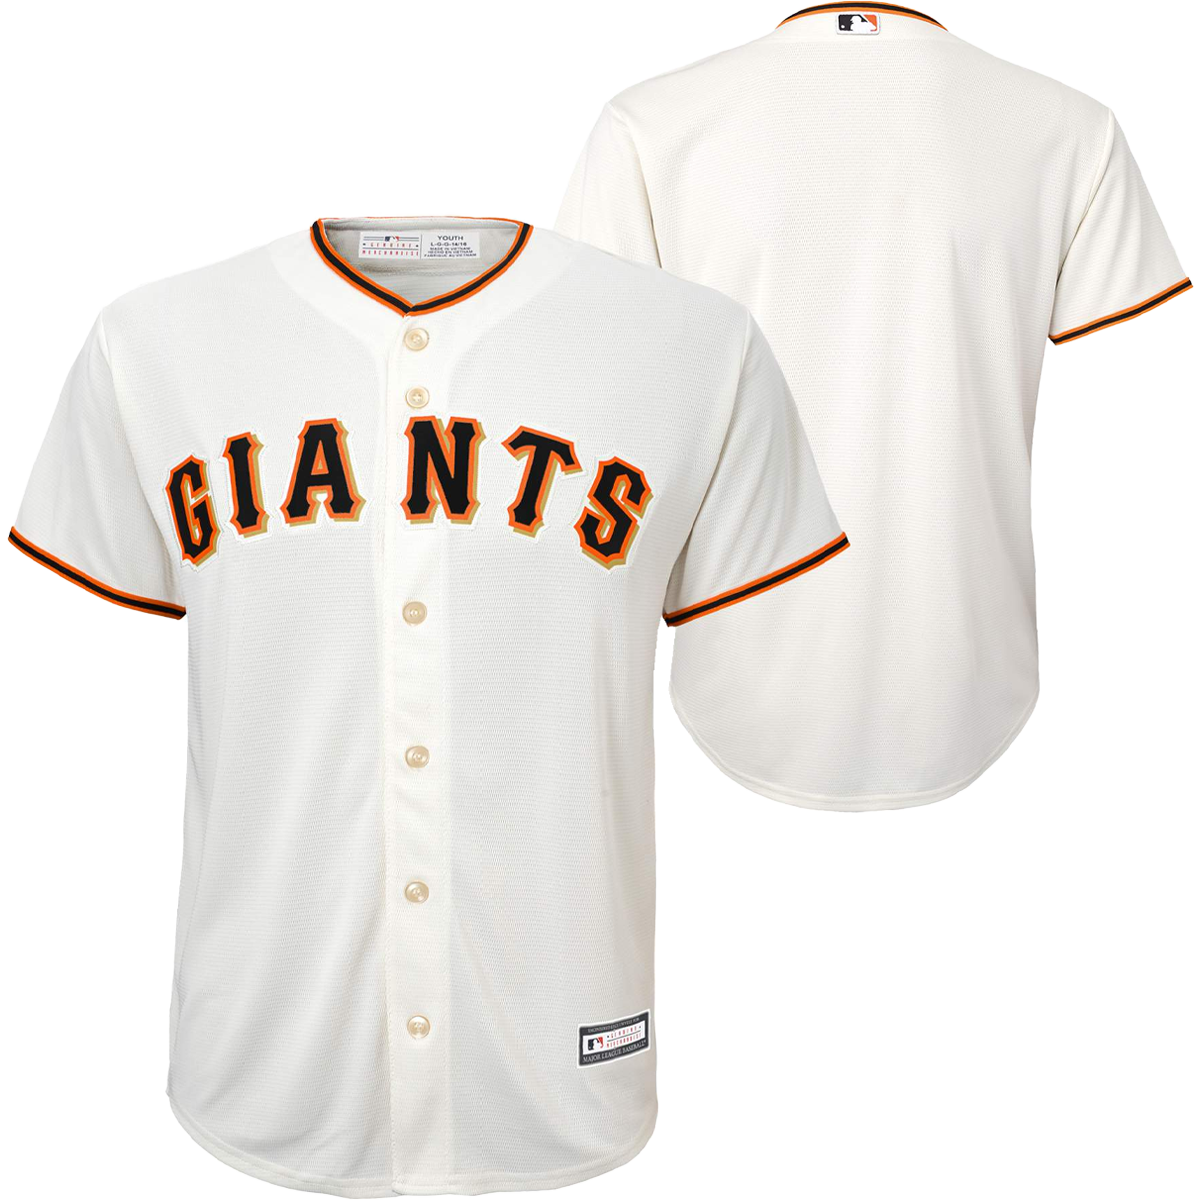 Youth Giants Sanitized Home Jersey – Sports Basement